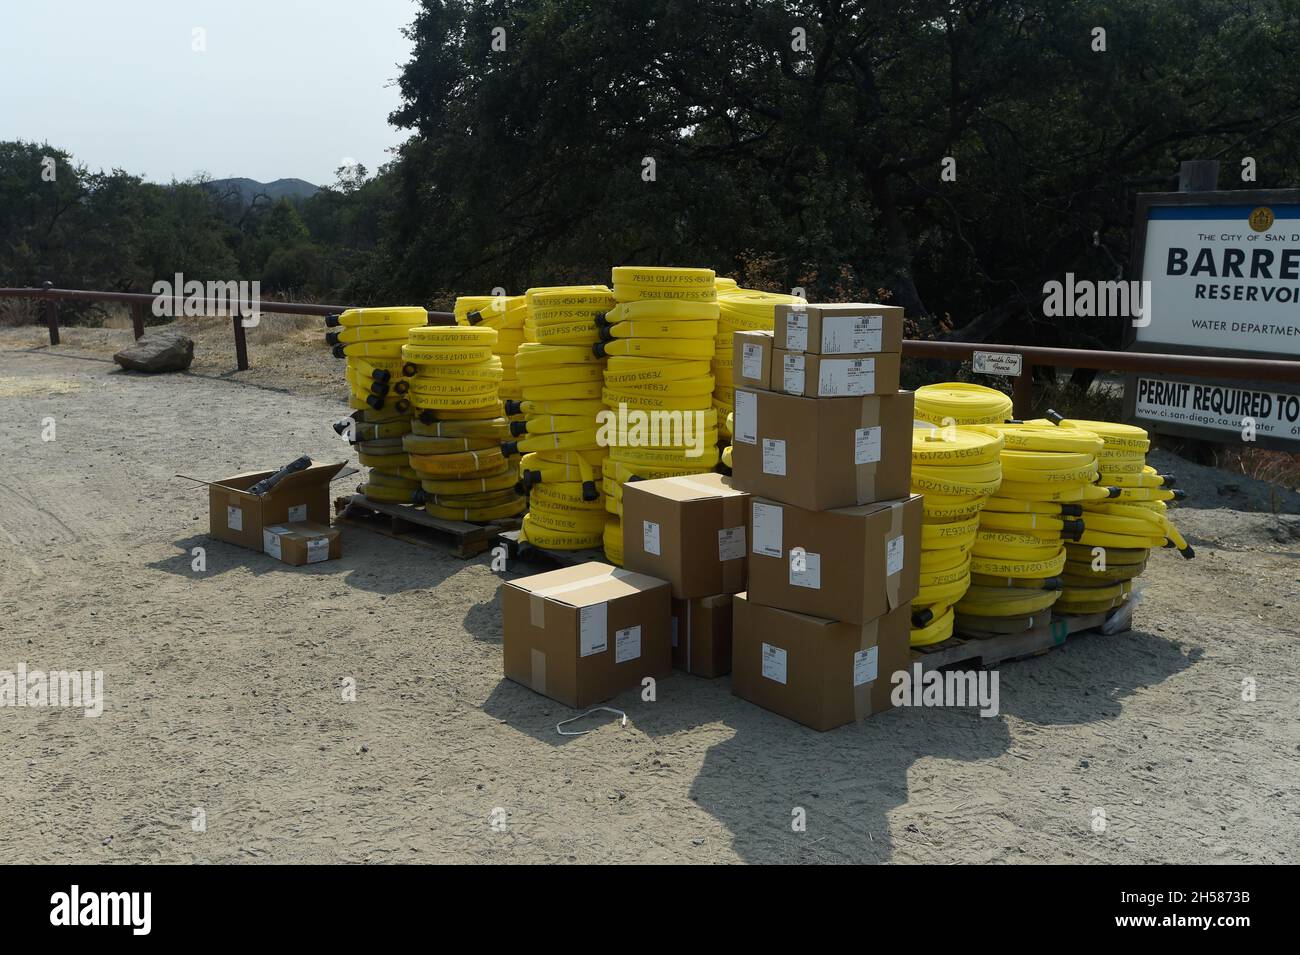 Cal Fire hose packs and associated valves await use at wildland fire east of San Diego, California. Stock Photo